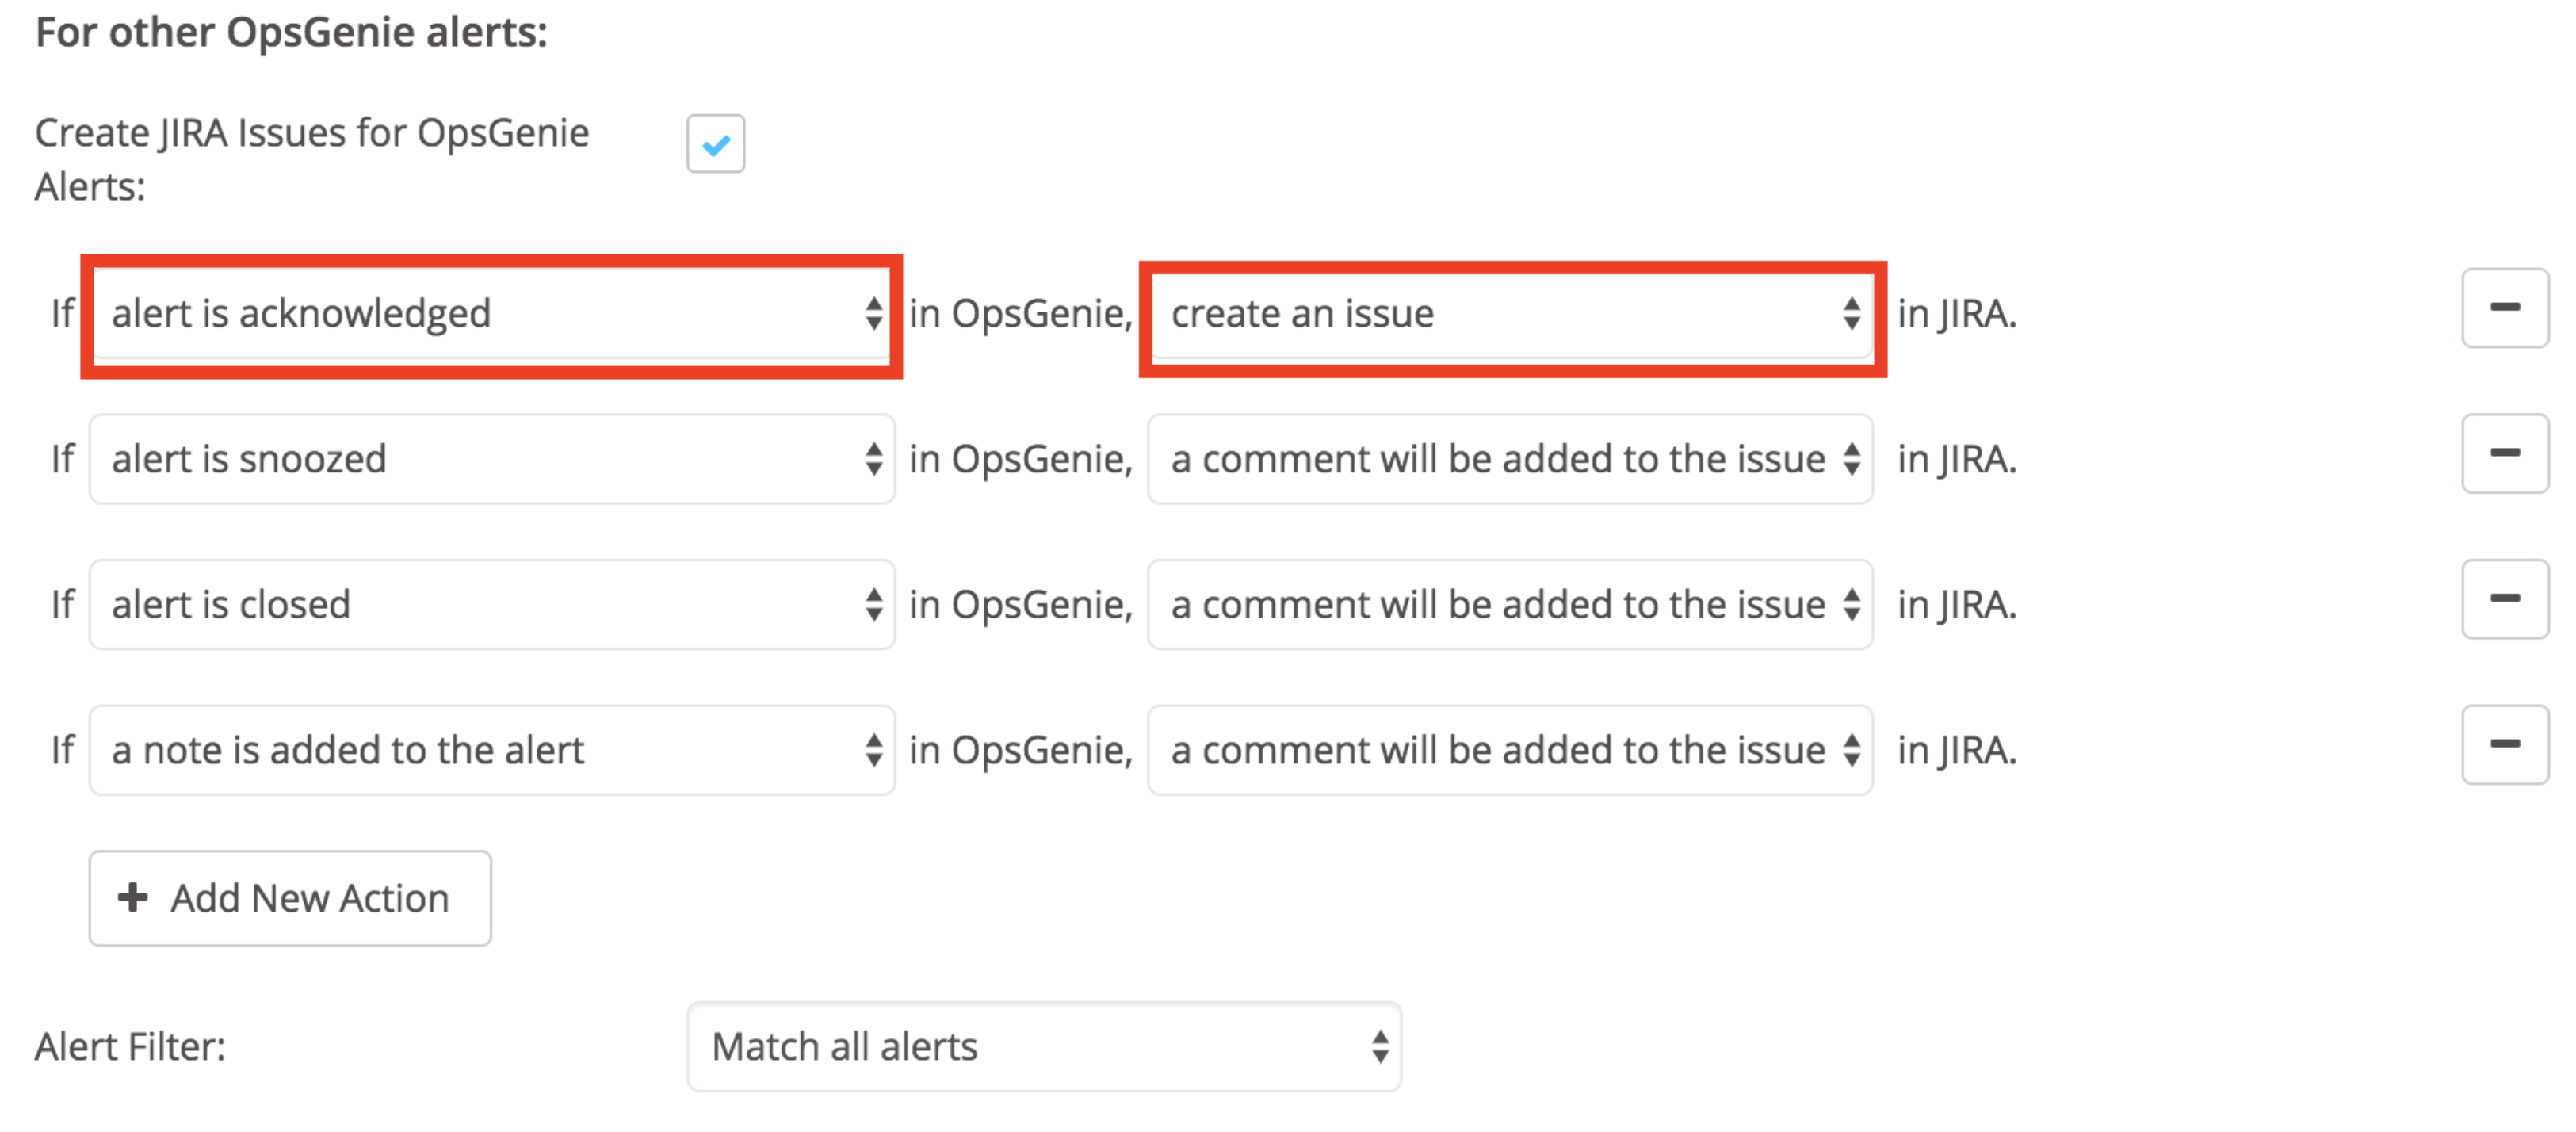 A screenshot showing issue creation rules for Opsgenie alerts.